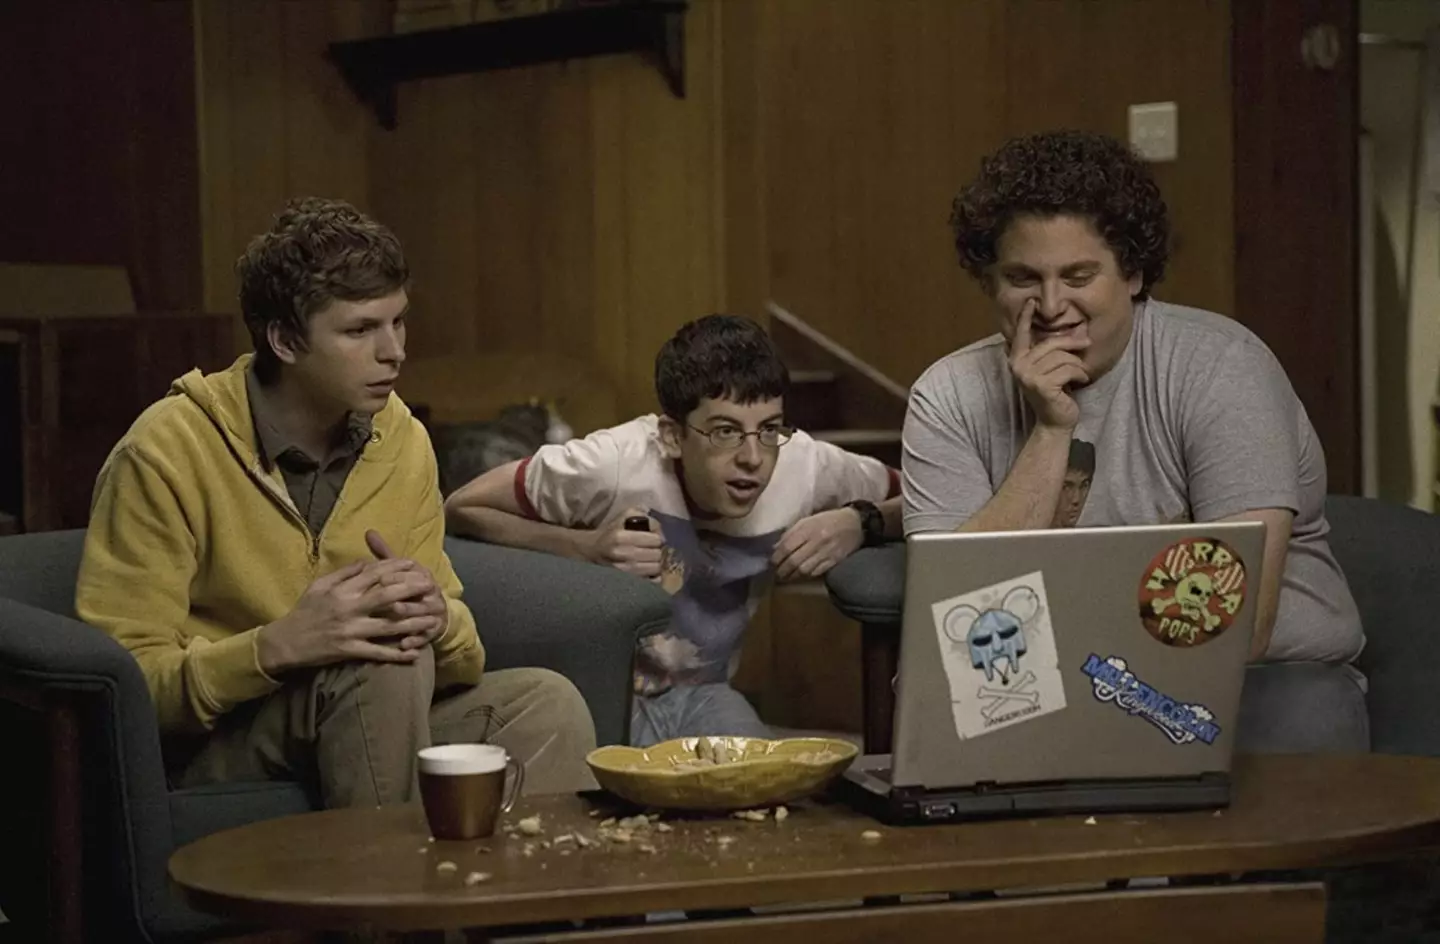 Superbad was released in 2007.